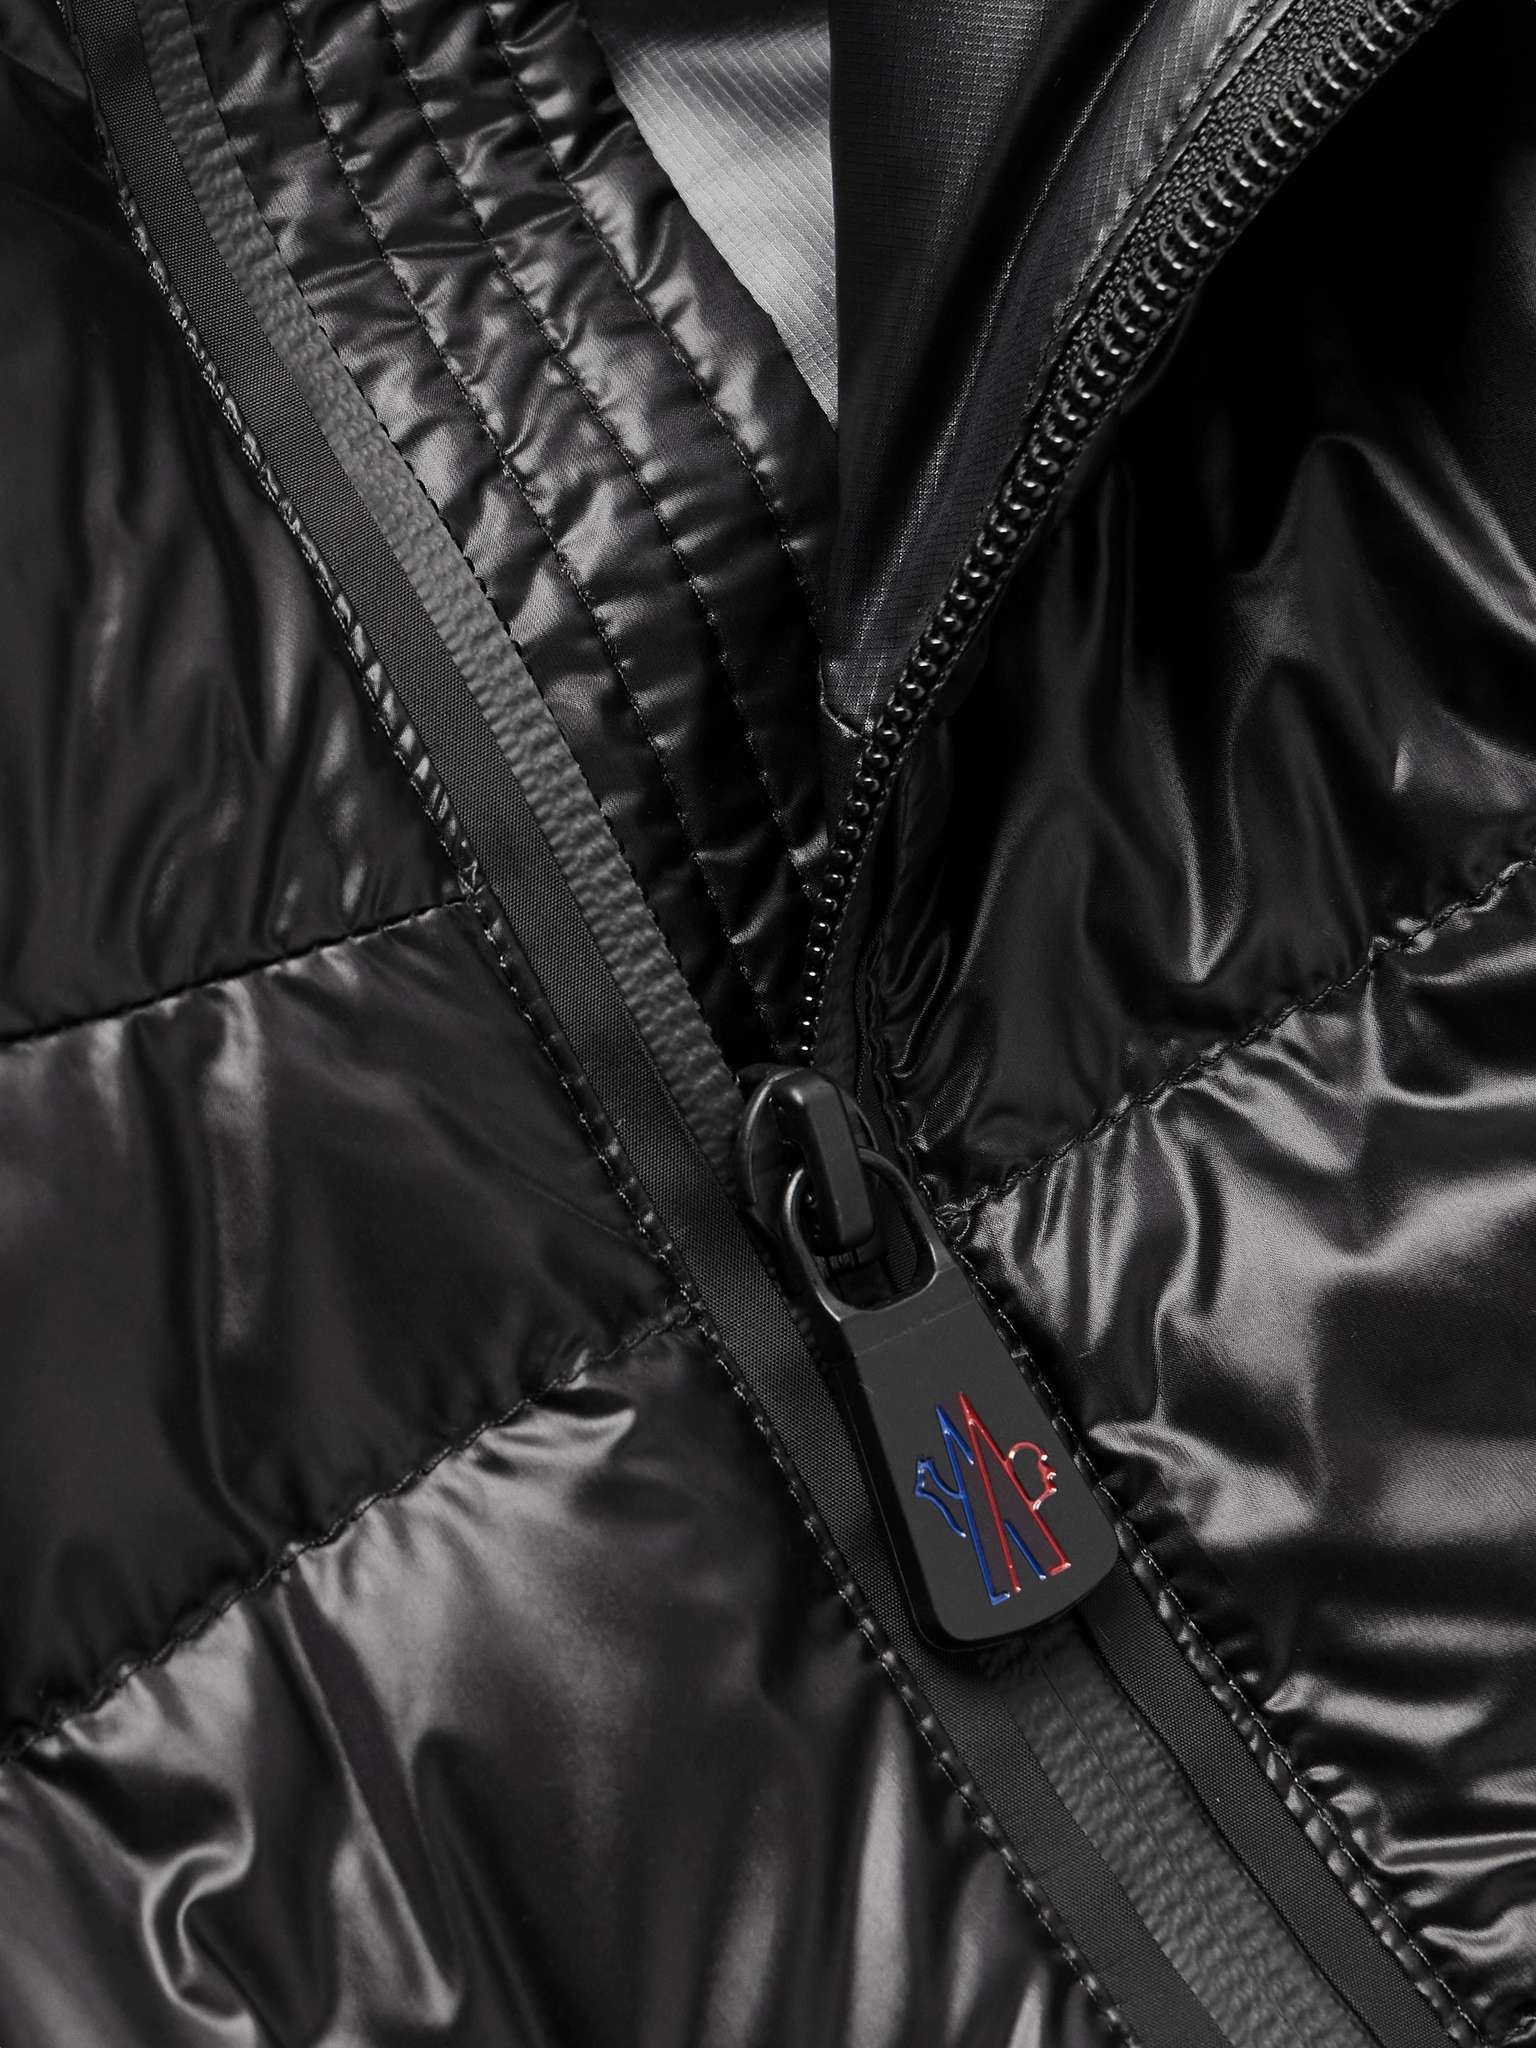 Lagorai Quilted Hooded Down Ski Jacket